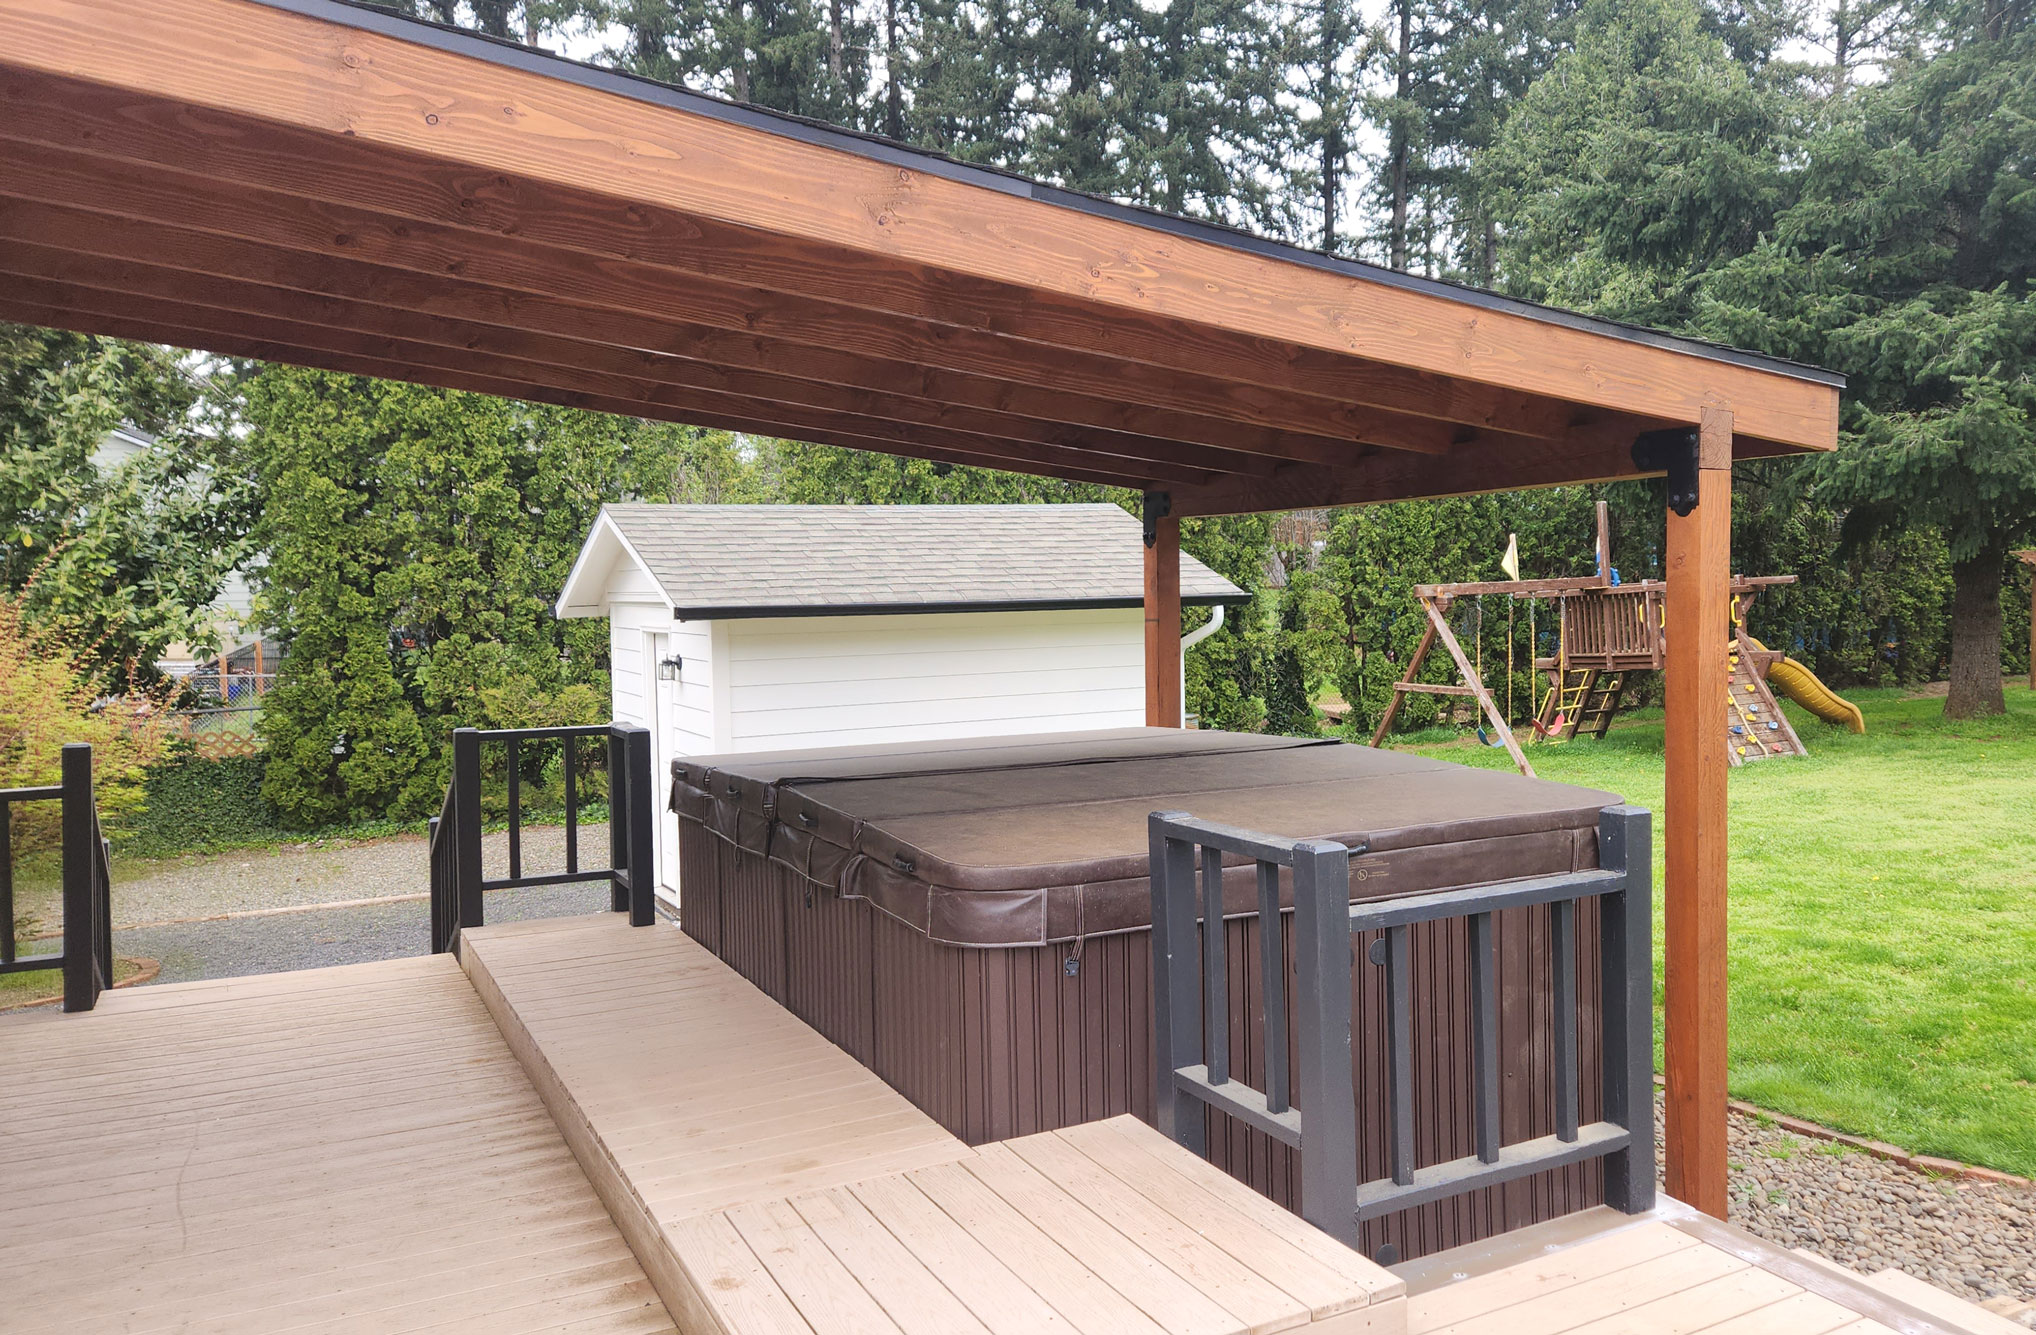 Porch roof built by Casa Bella Construction over porch and hot tub with backyard in background